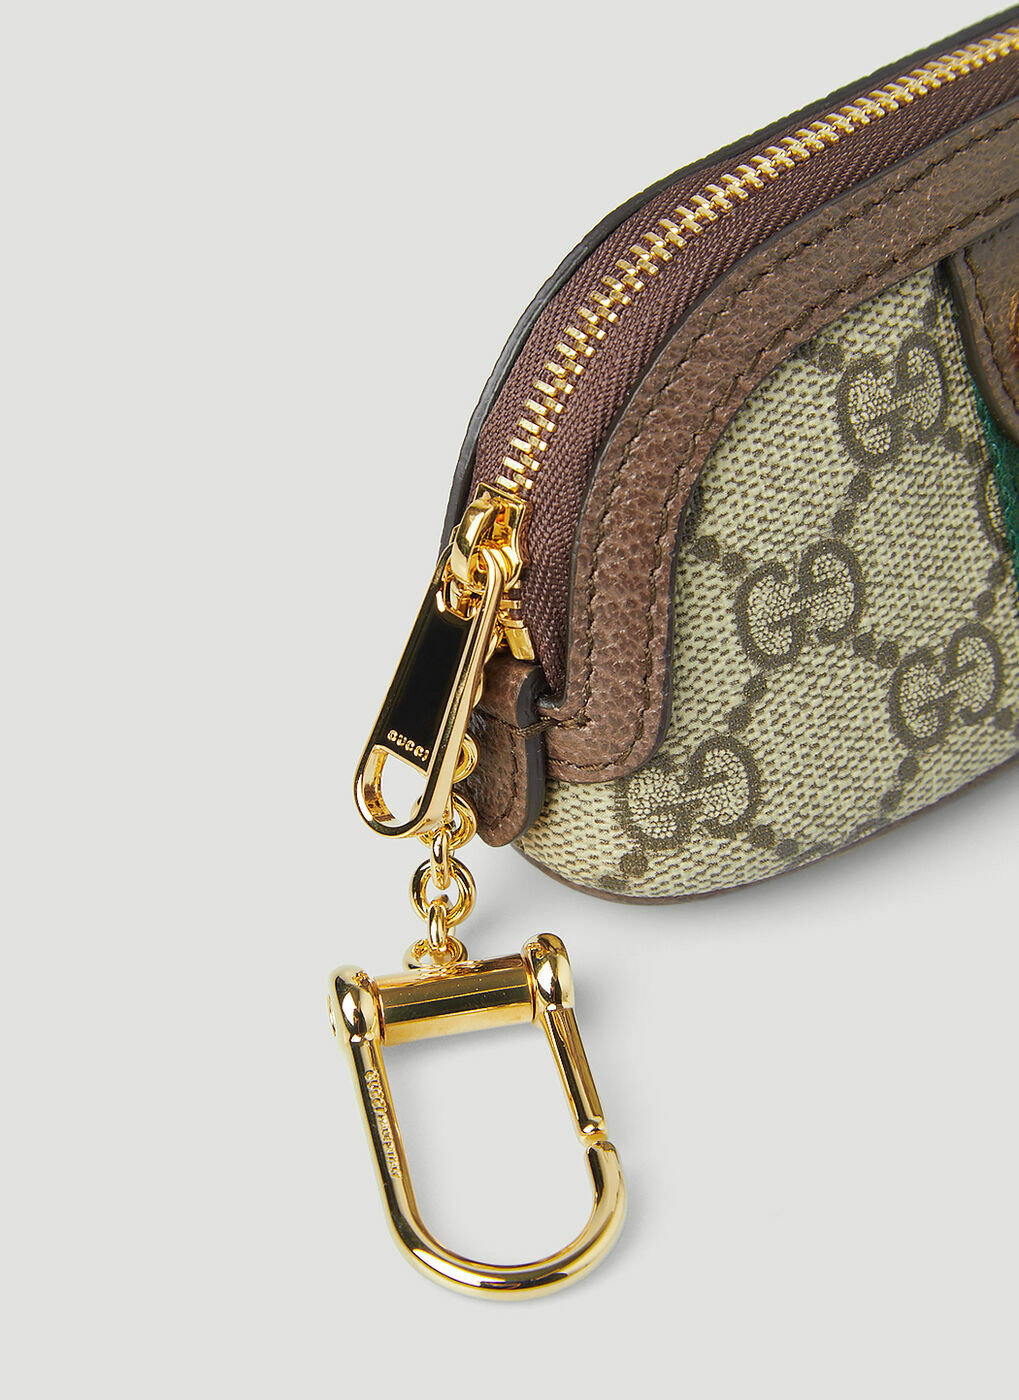 Gucci Beige GG Ophidia Coin Pouch Gucci